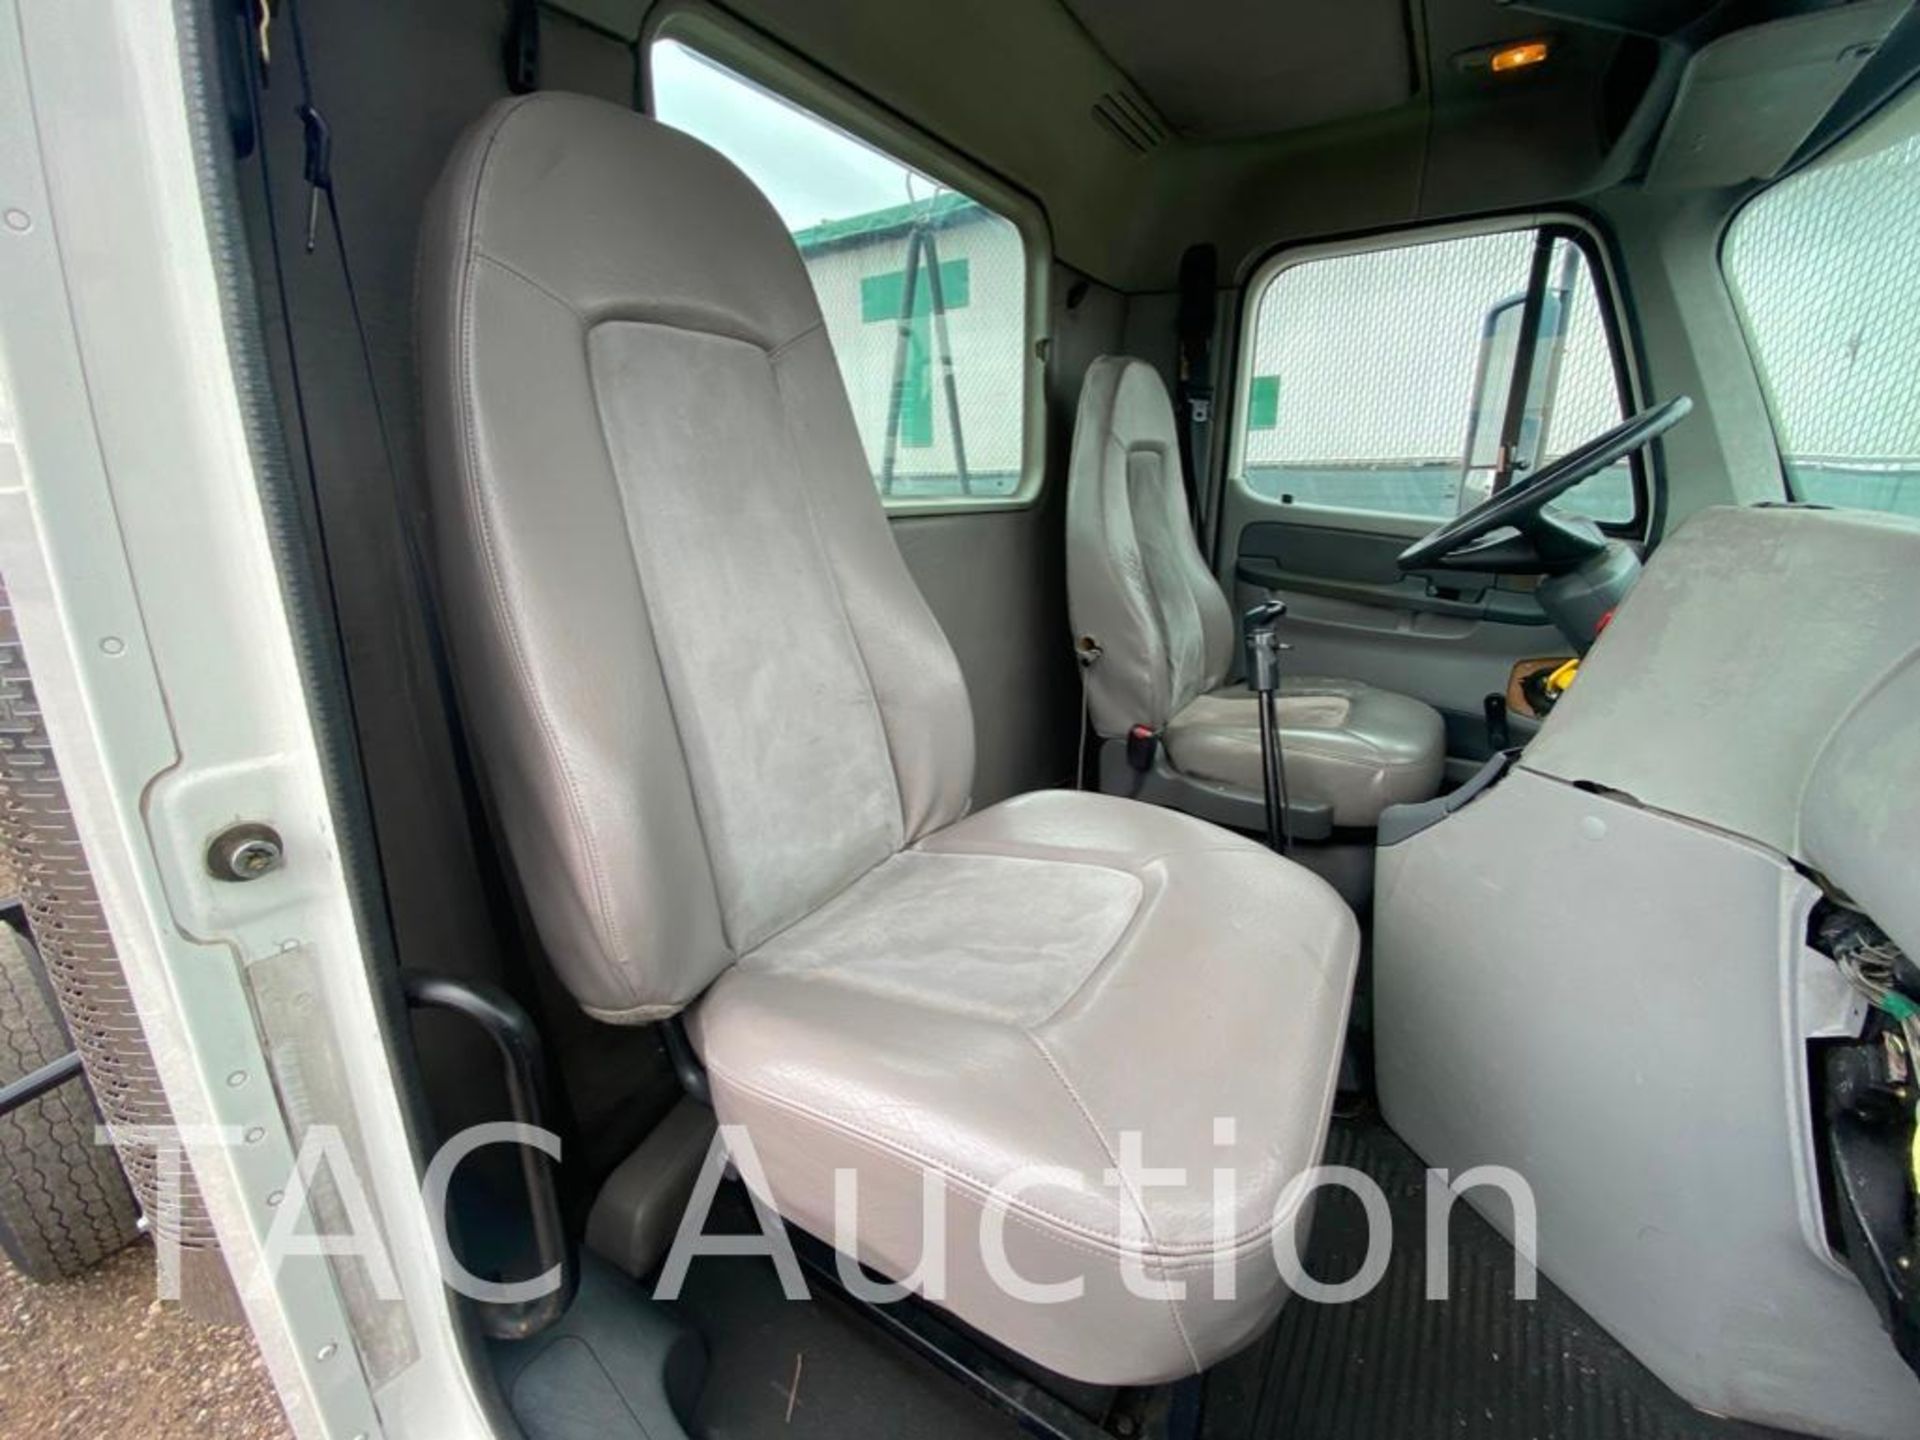 2005 Freightliner Columbia Day Cab - Image 30 of 72